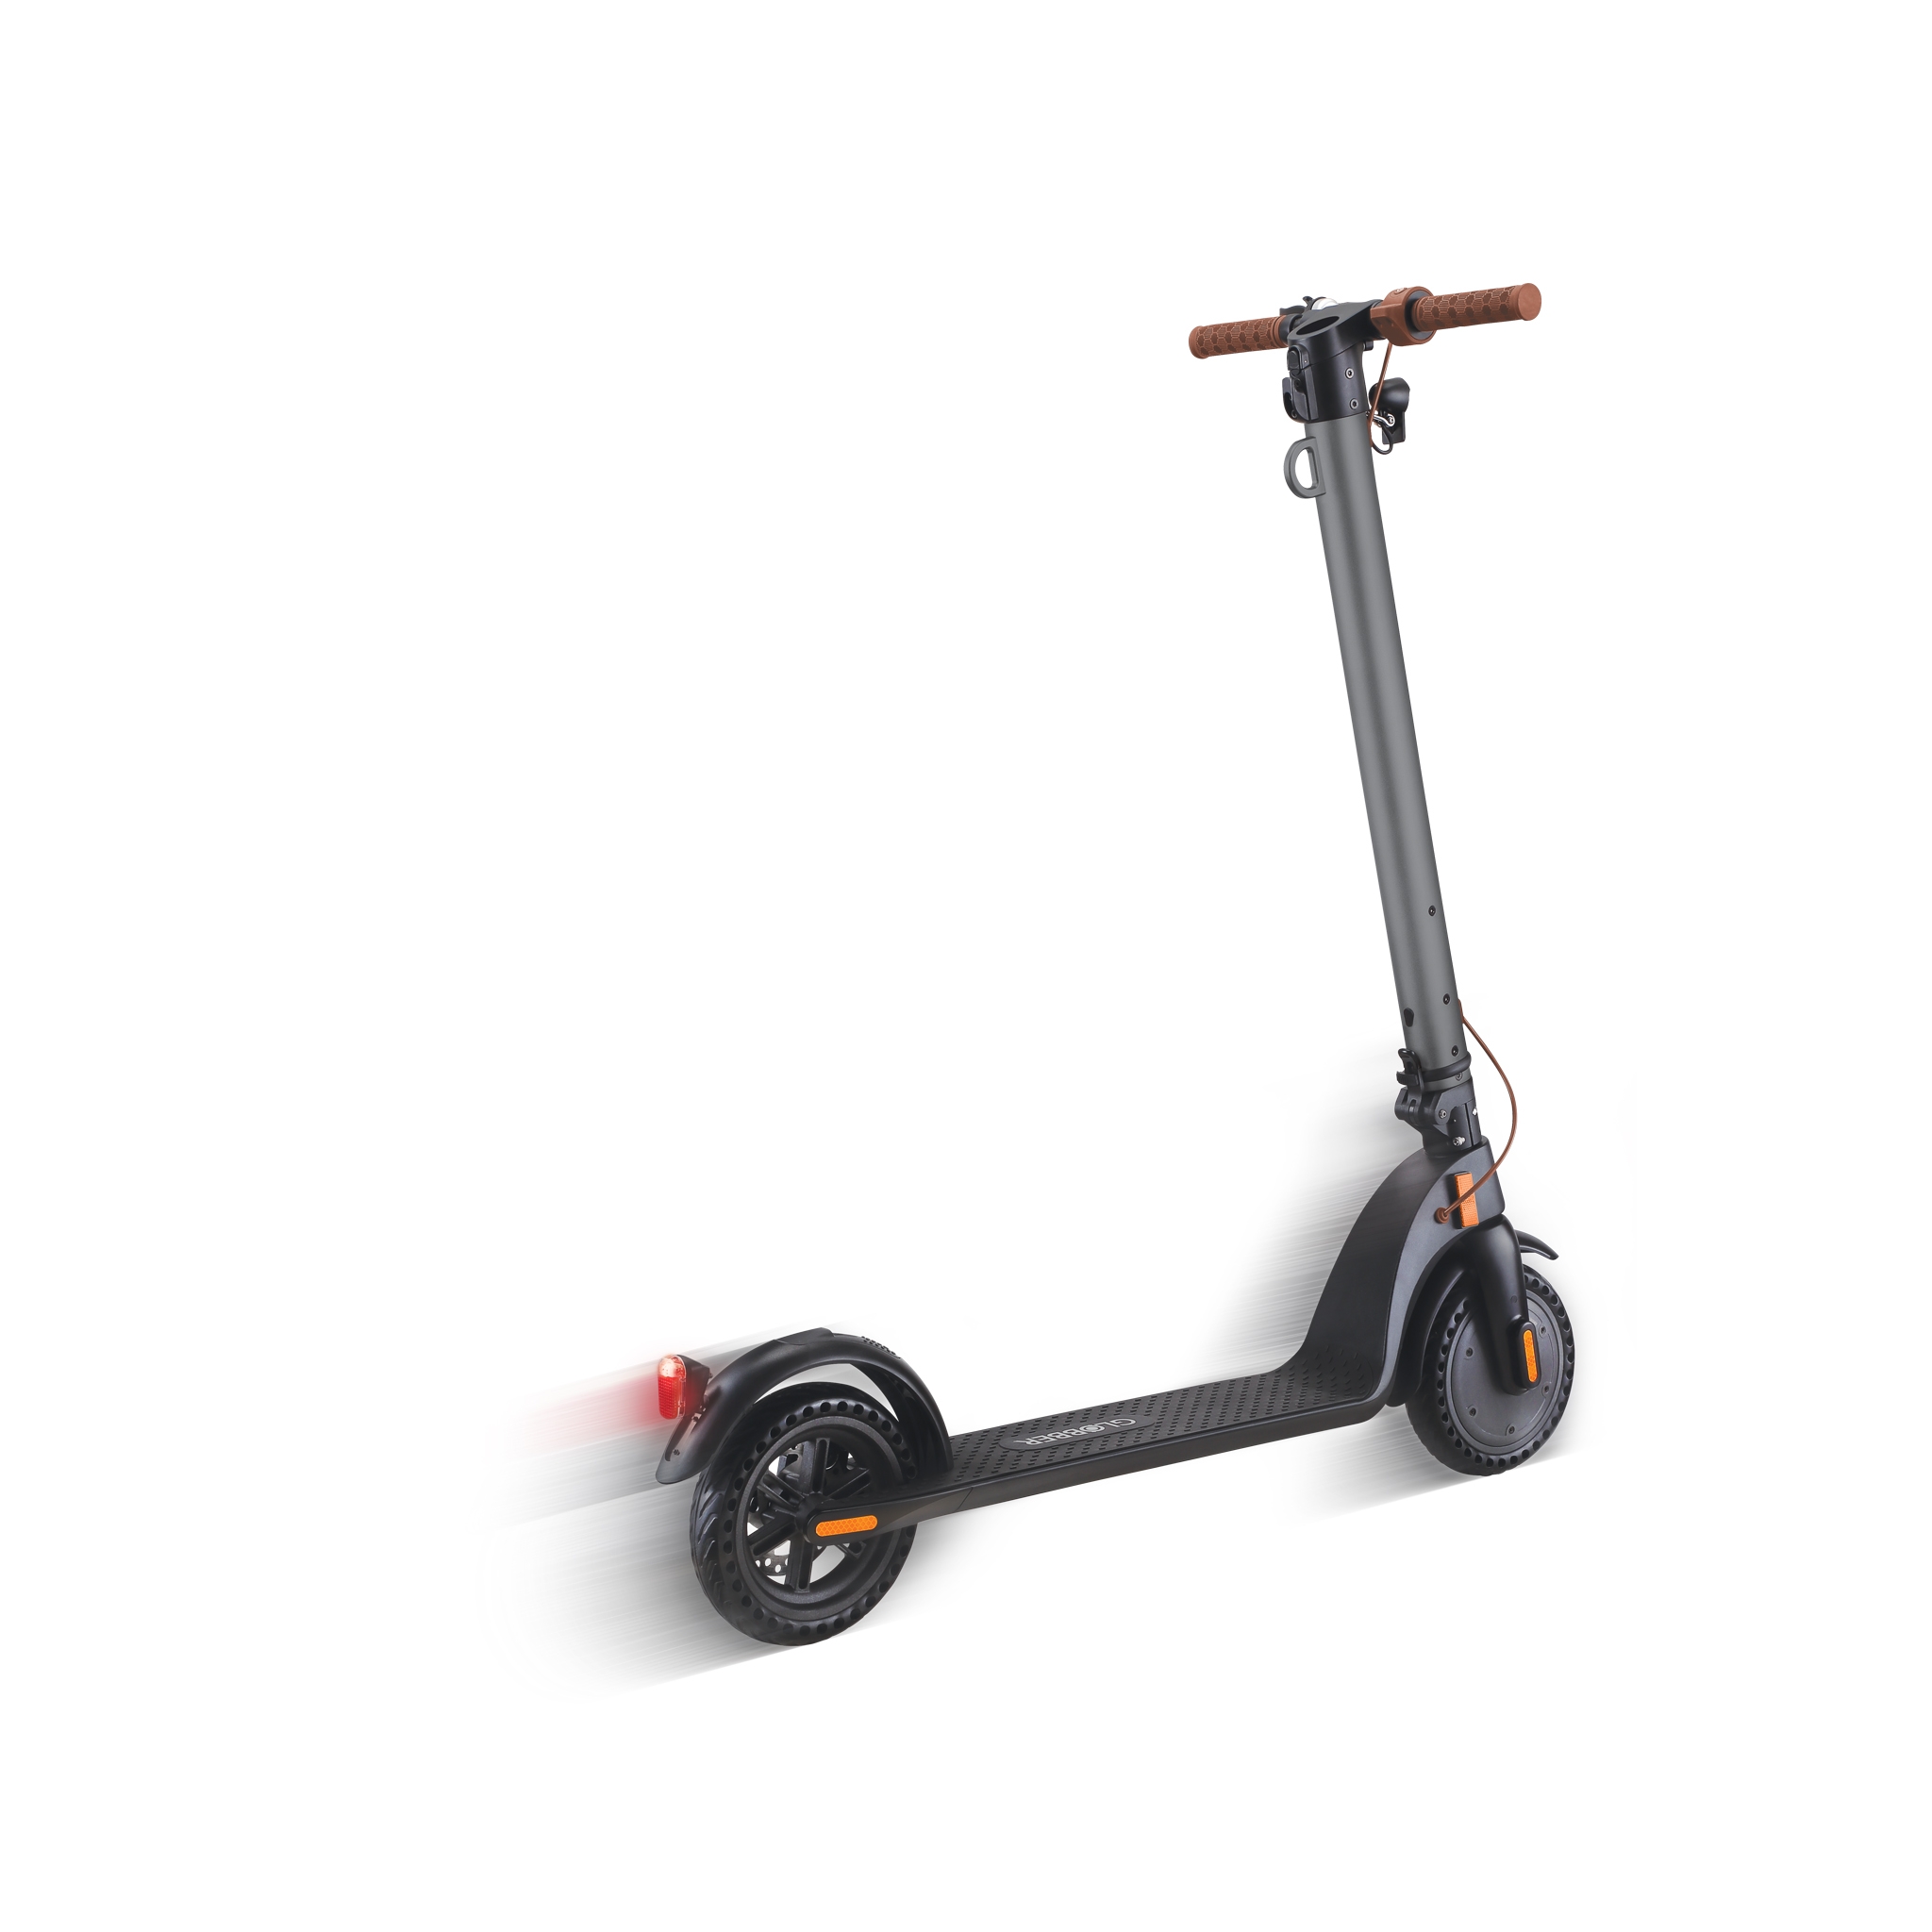 Globber-ONE-K-E-MOTION-23-electric-scooter-for-teens-and-adults-with-350w-brushless-hub-motor 3